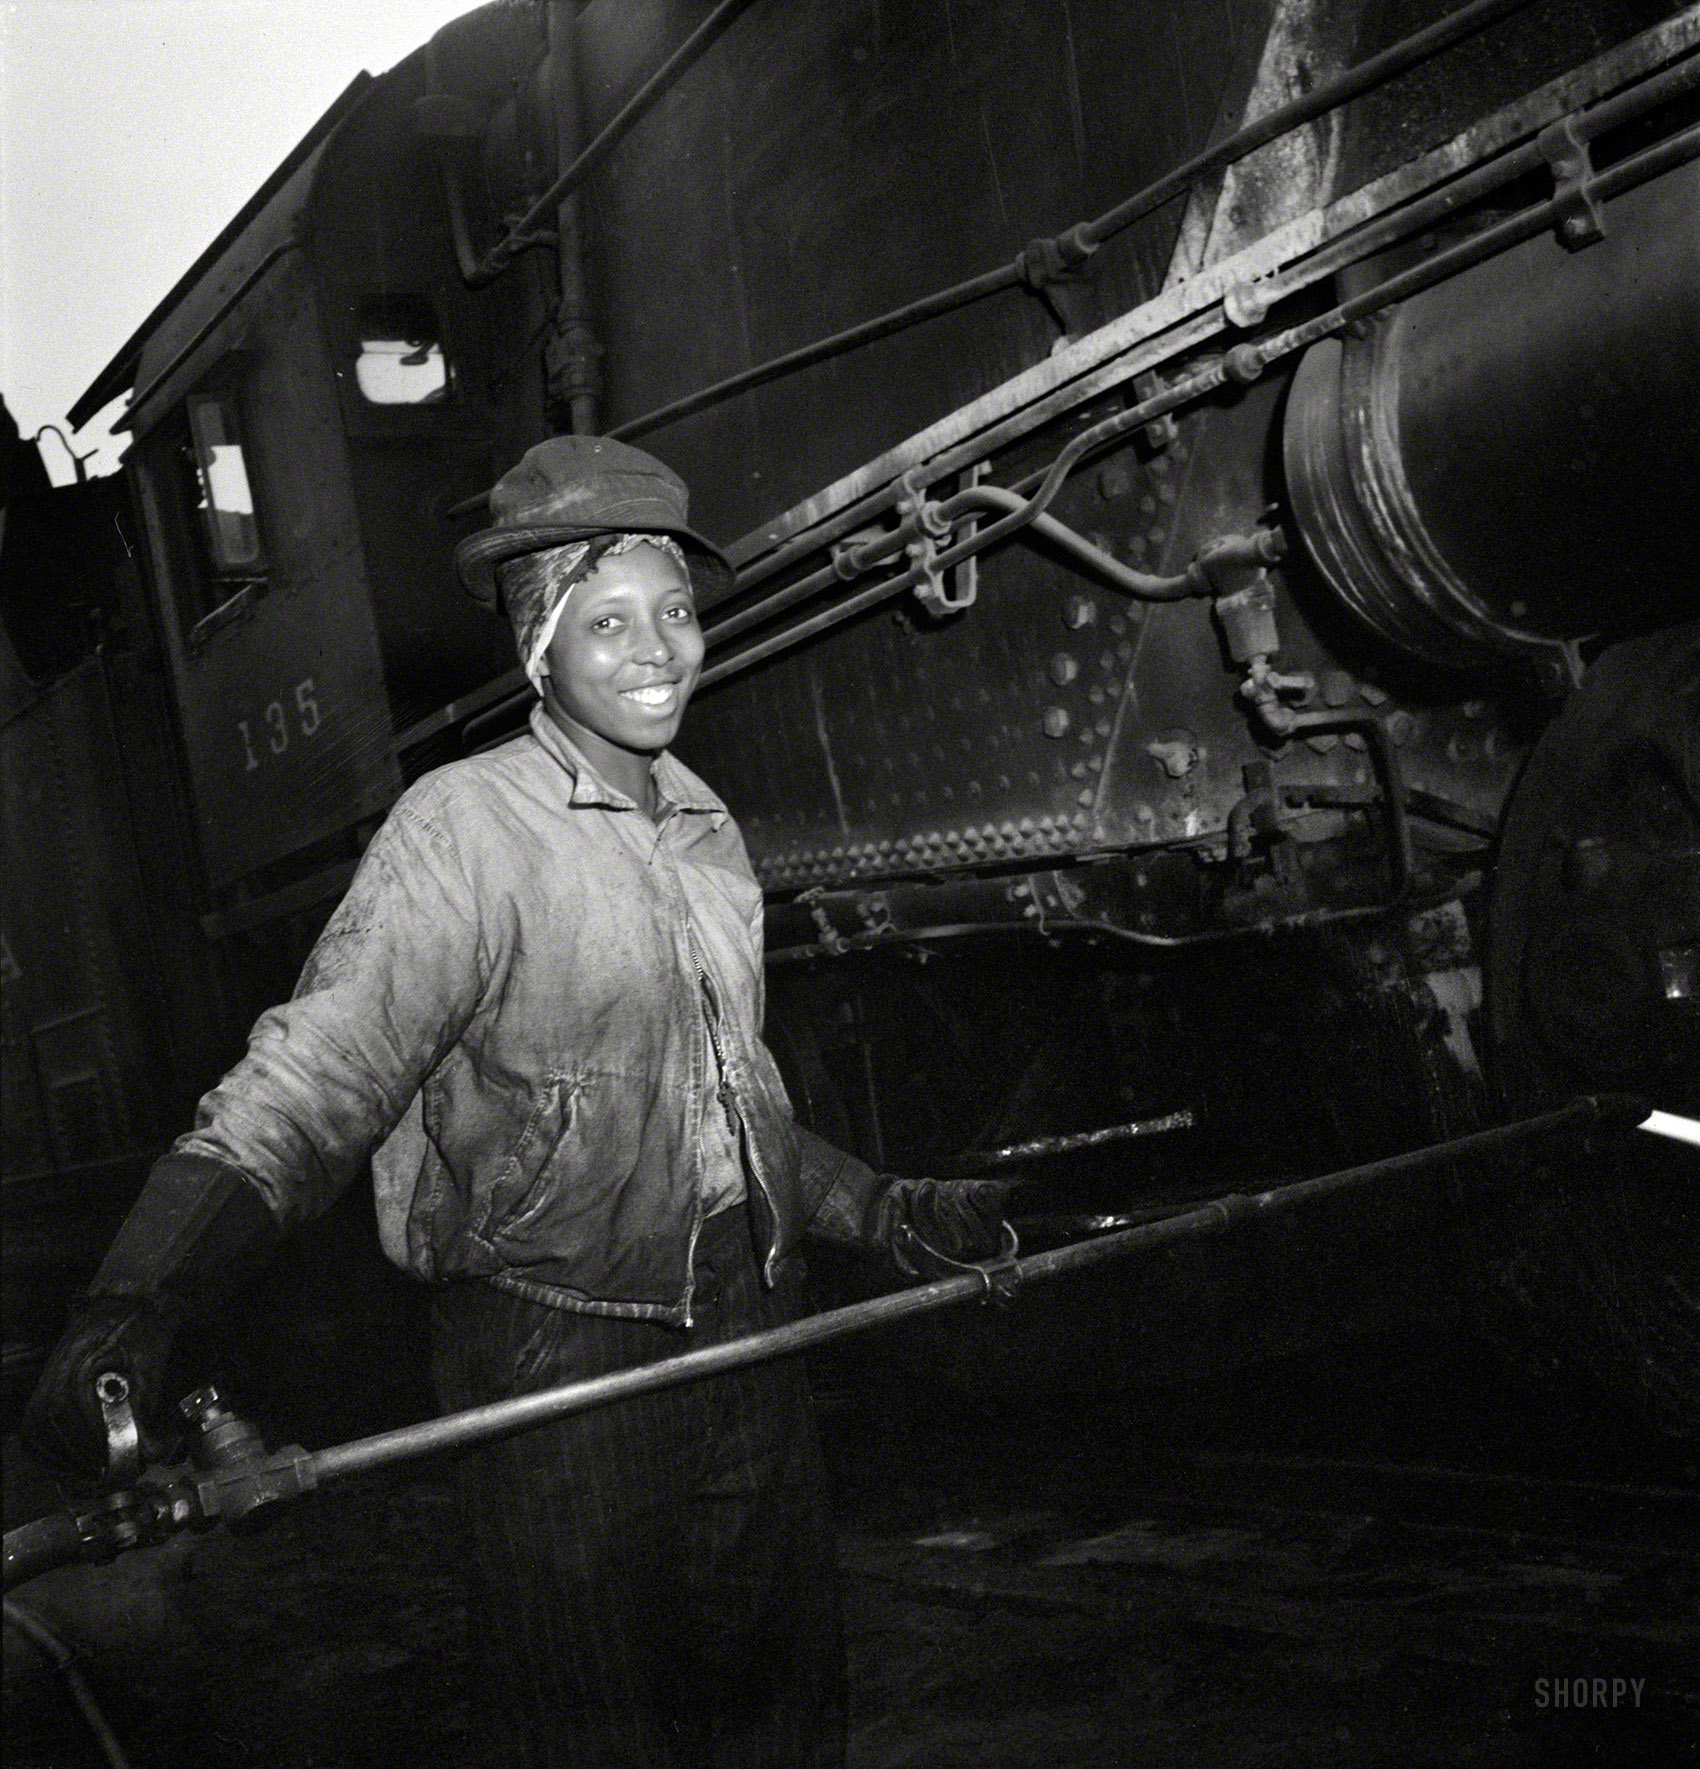 June 1943. "Pitcairn, Pennsylvania. Mrs. Bernice Stevens of Braddock, Pa., mother of one child, employed in the engine house of the Pennsylvania Railroad, earns 58 cents per hour. She is cleaning a locomotive with a high pressure nozzle. Her husband is in the Army." Photo by Marjory Collins. View full size.